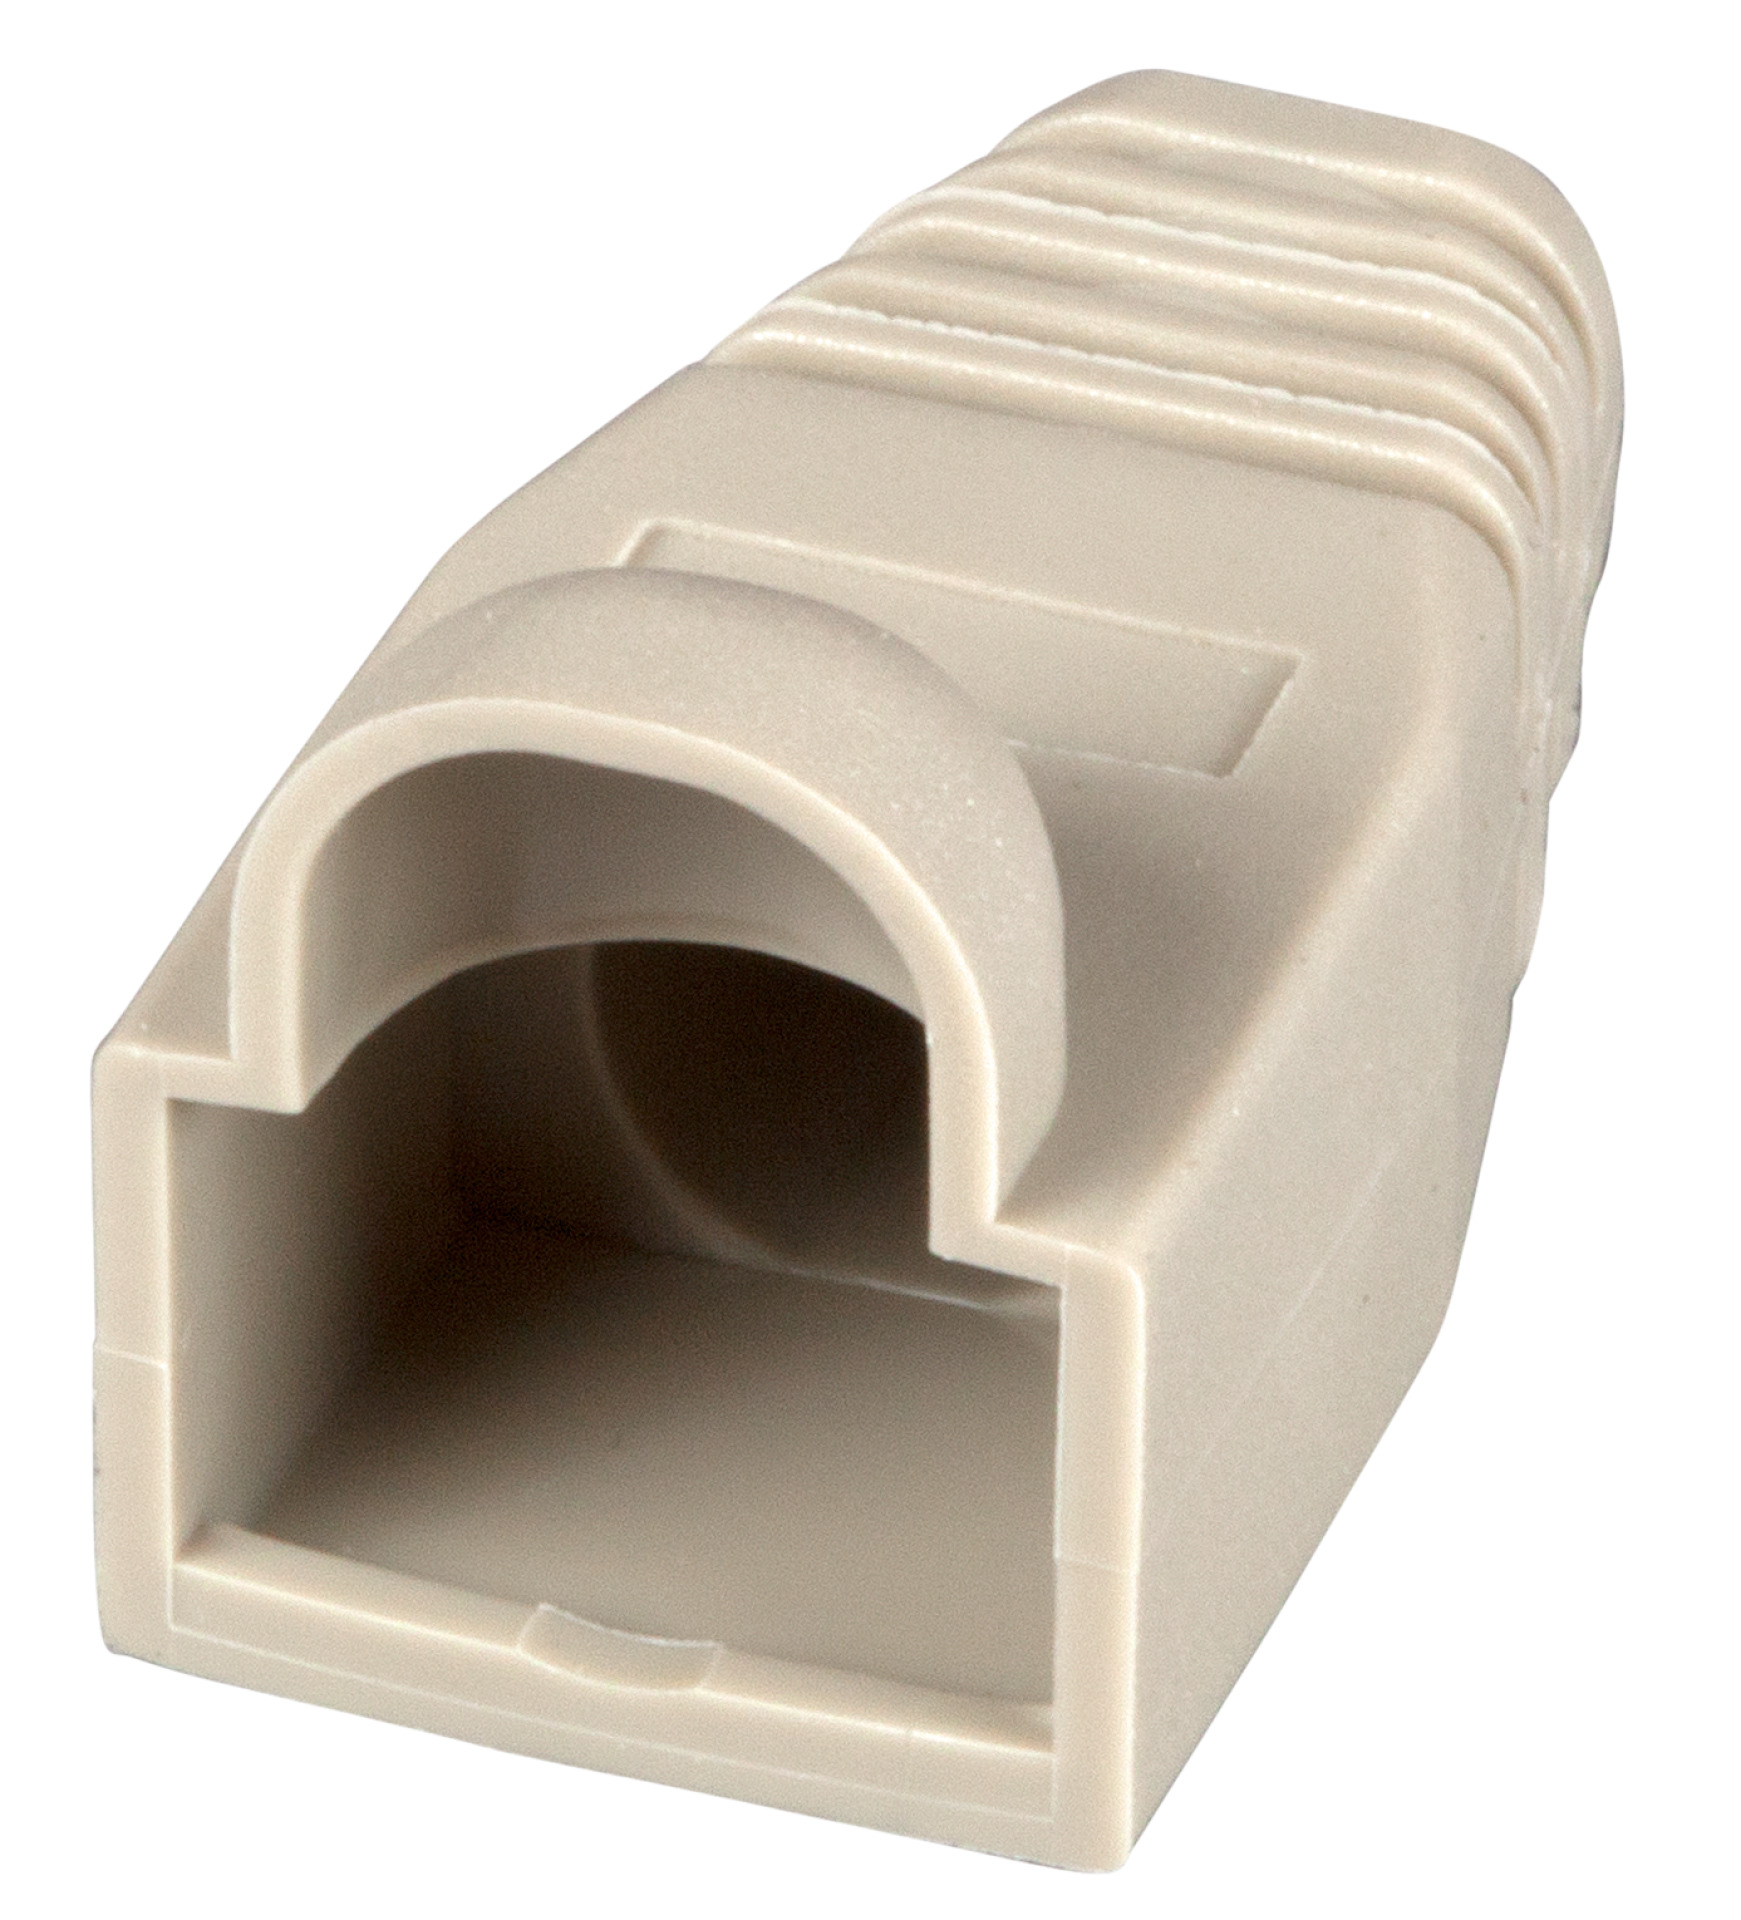 Anti-Kink Sleeve RJ45 Beige, with Latch Protection, 100 Pcs.